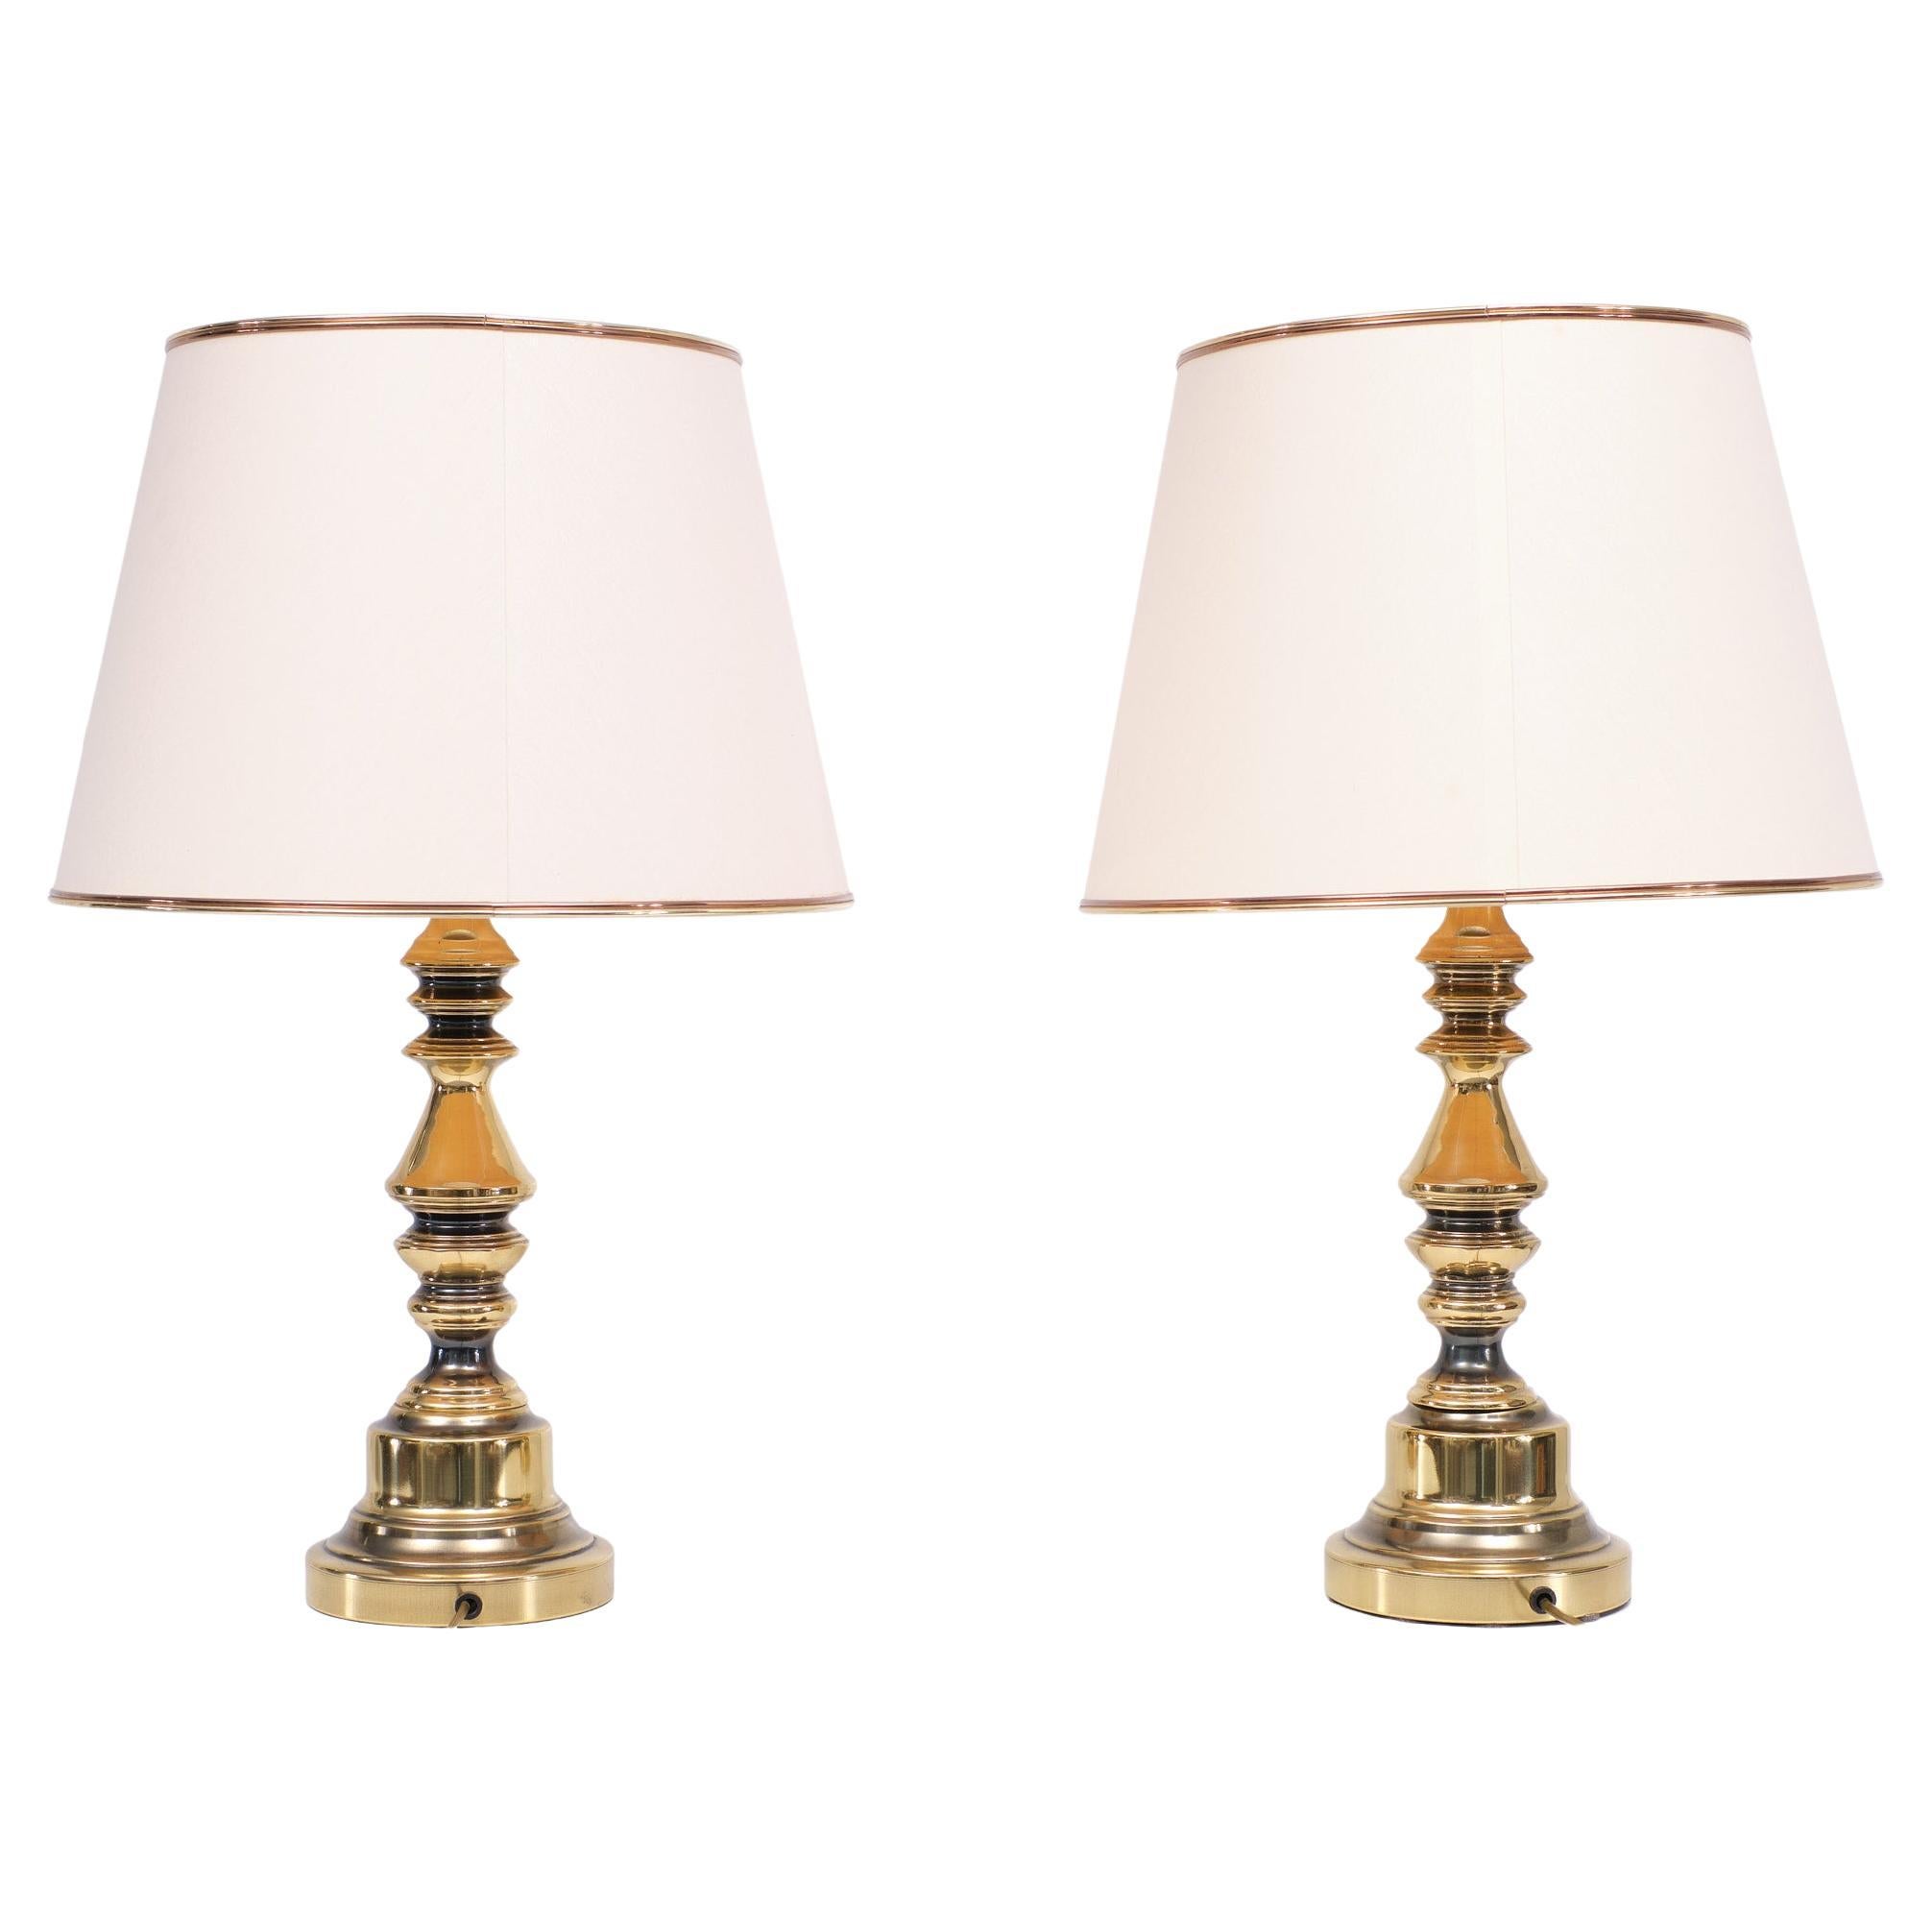 Very nice set Brass classic table lamps, comes with matching Shades.
1970s in a Hollywood Regency style.